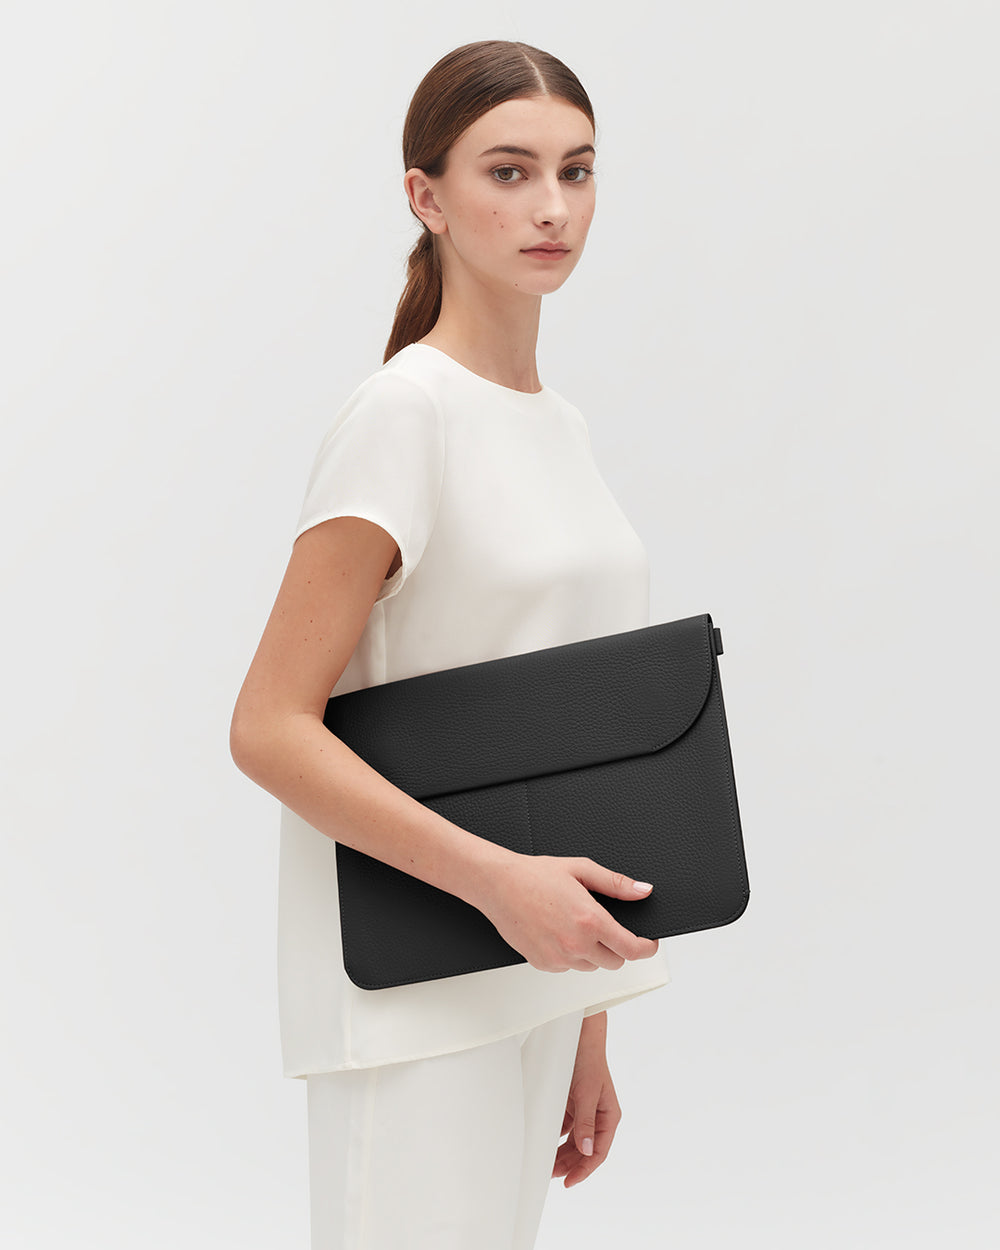 Woman standing holding a large clutch bag.